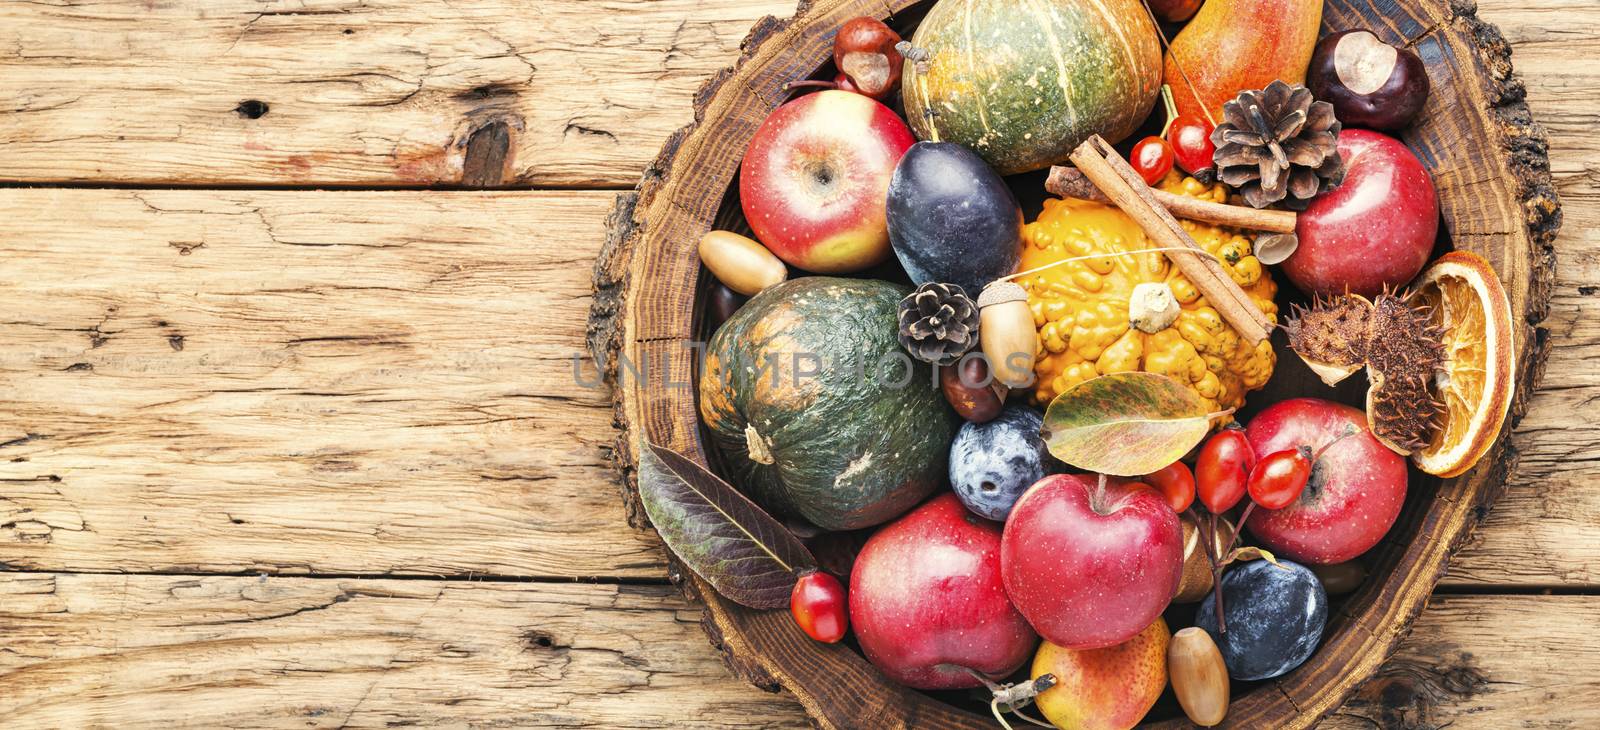 Autumn fruits and pumpkins with fallen leaves.Autumn harvest on wooden table